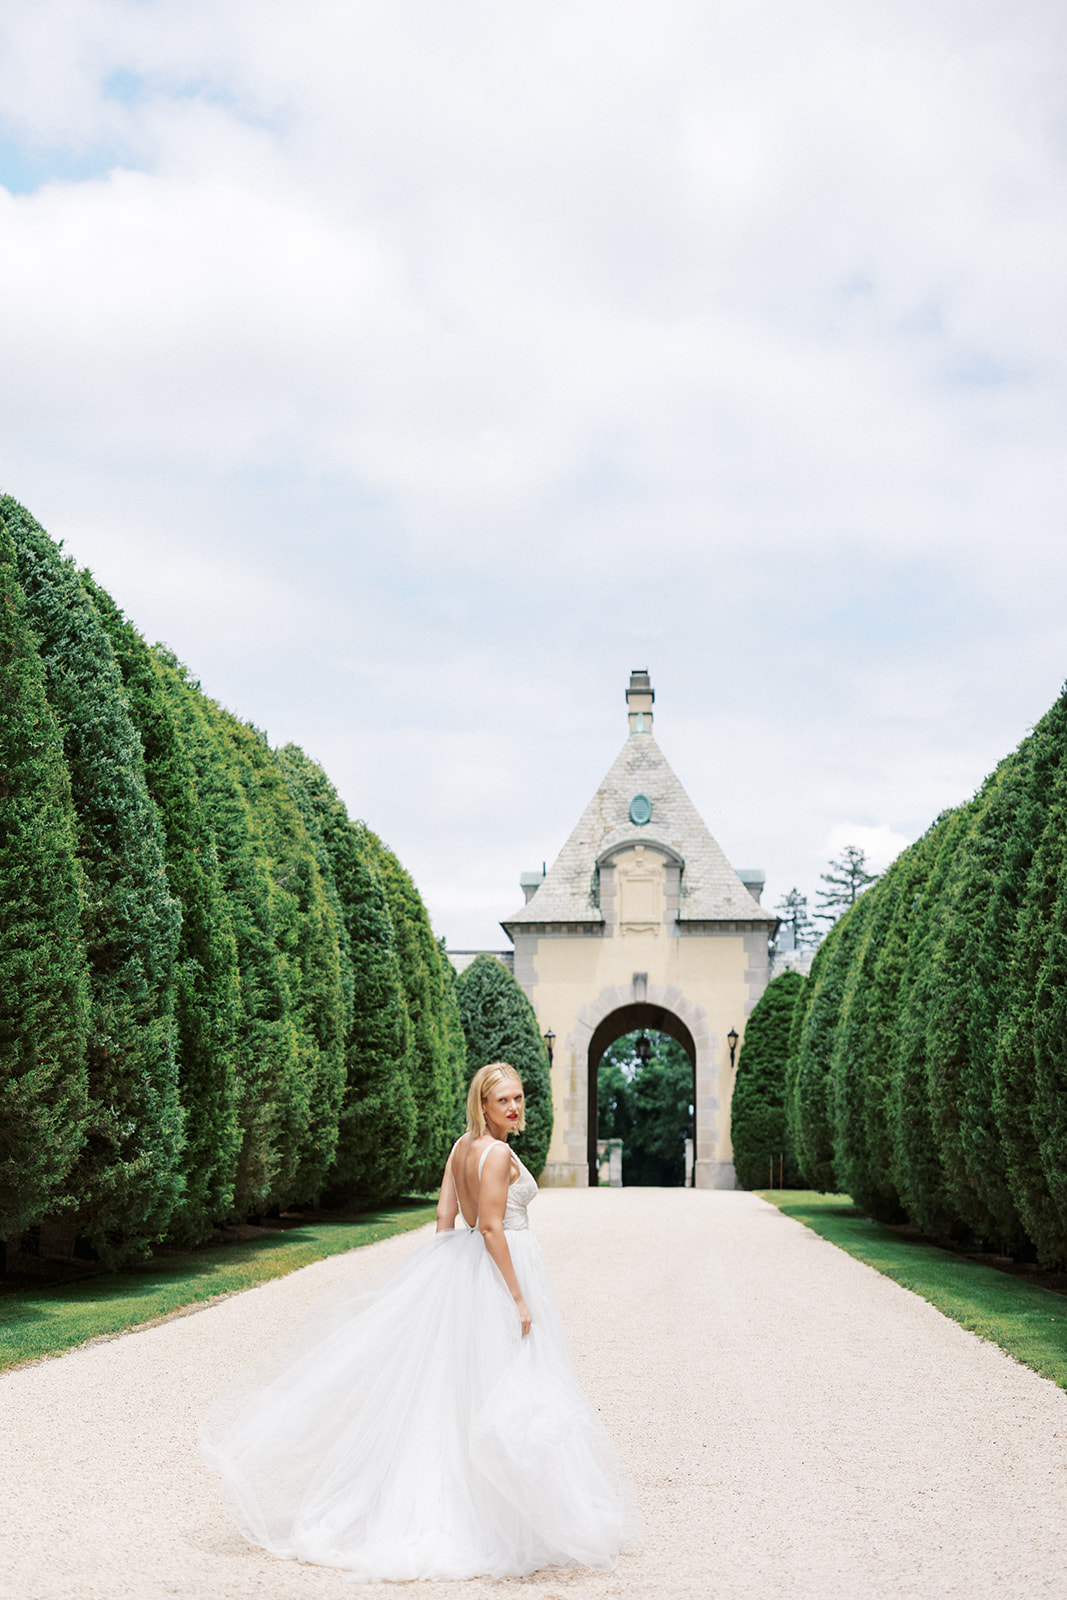 A bride walks down a gravel road lined with tall trees looking over her shoulder